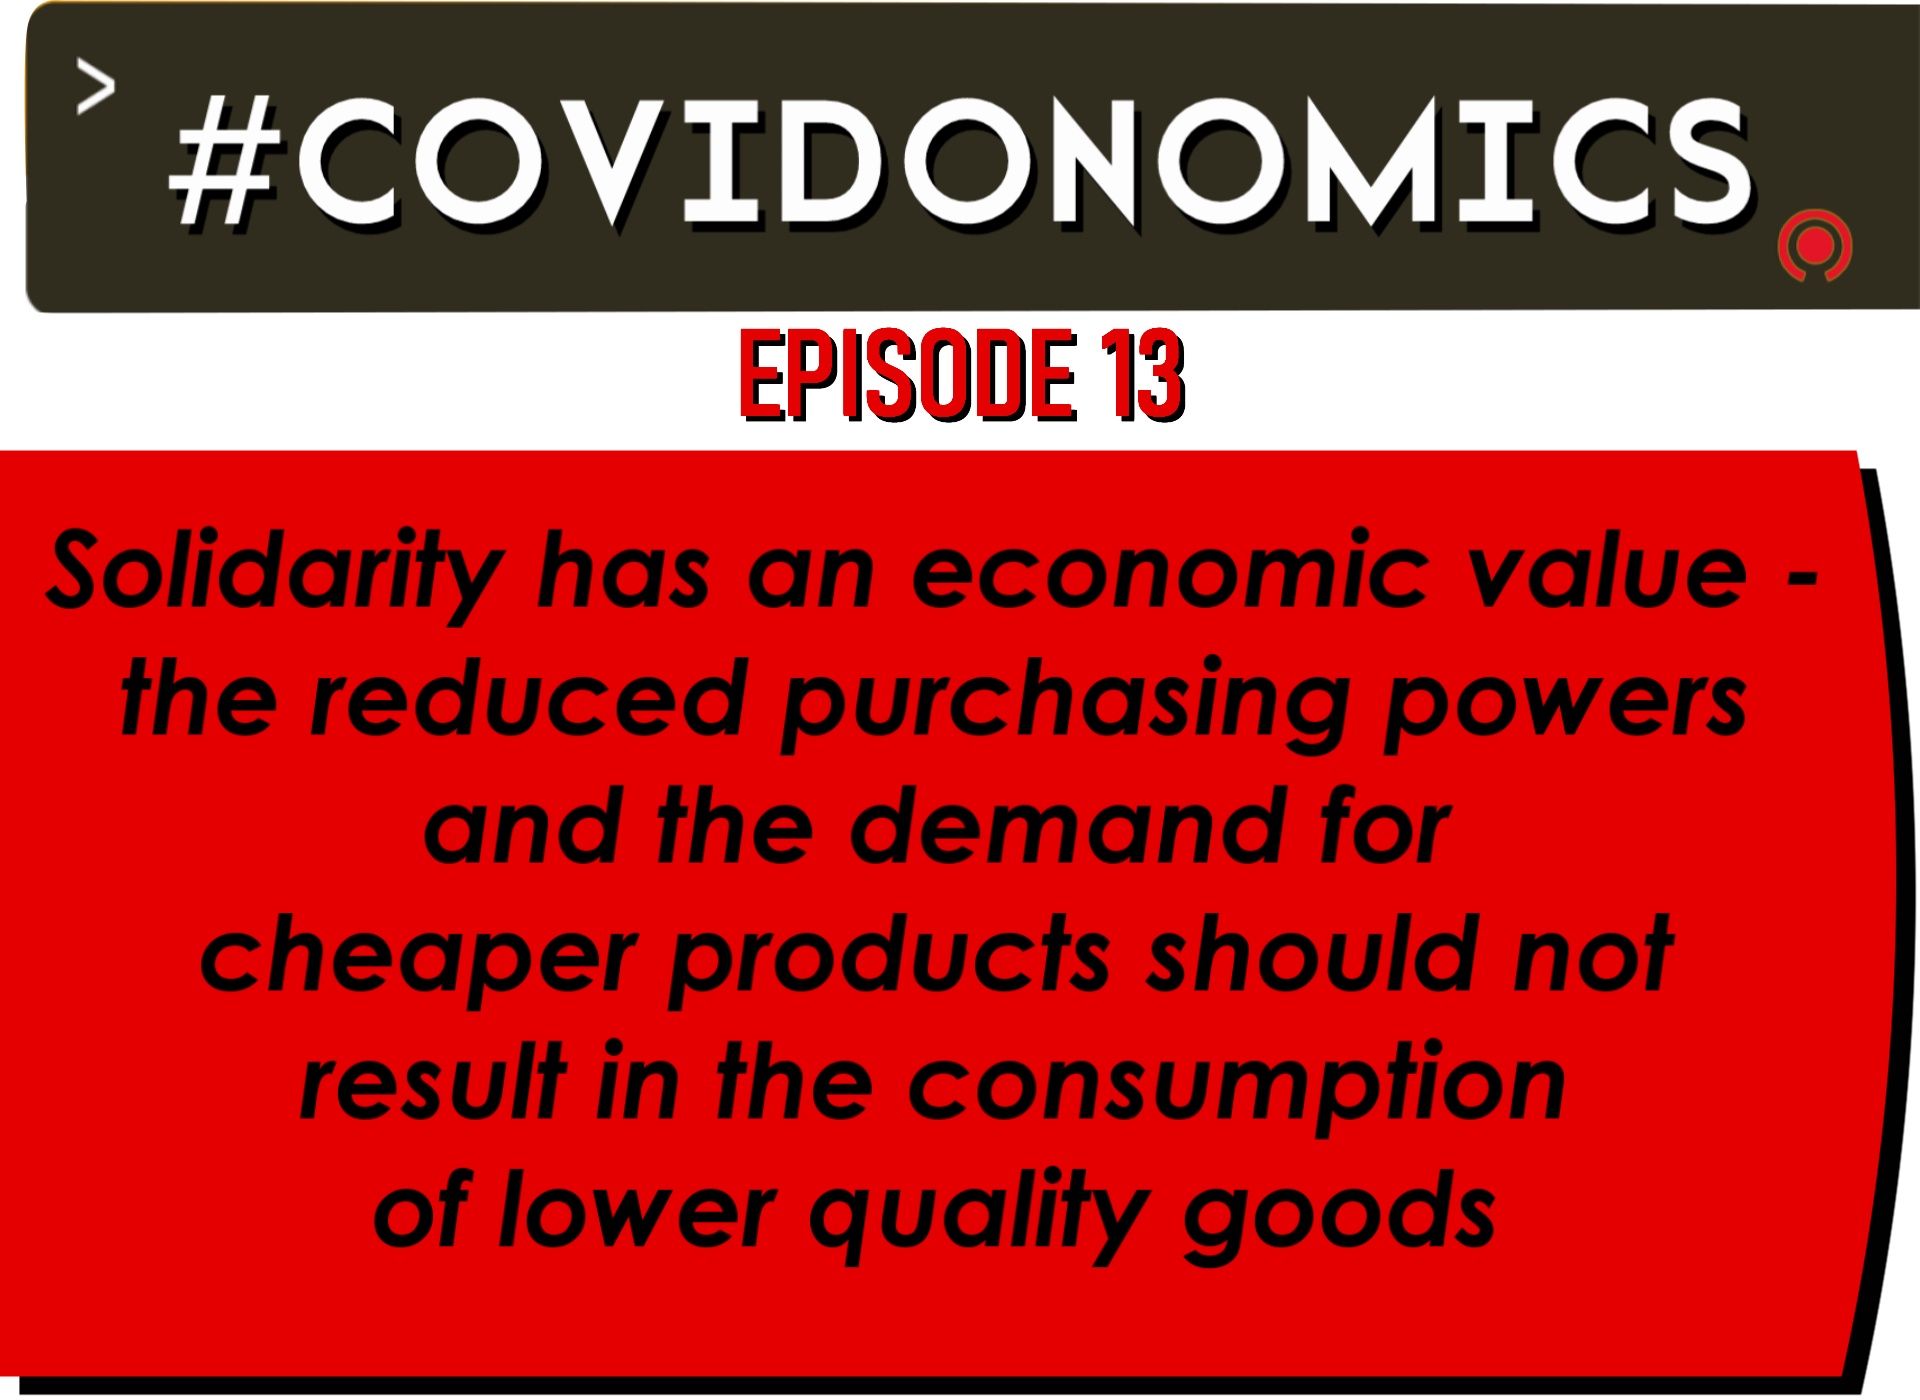 Solidarity has an economic value - the reduced purchasing powers and the demand for cheaper products should not result in the consumption of lower quality goods 